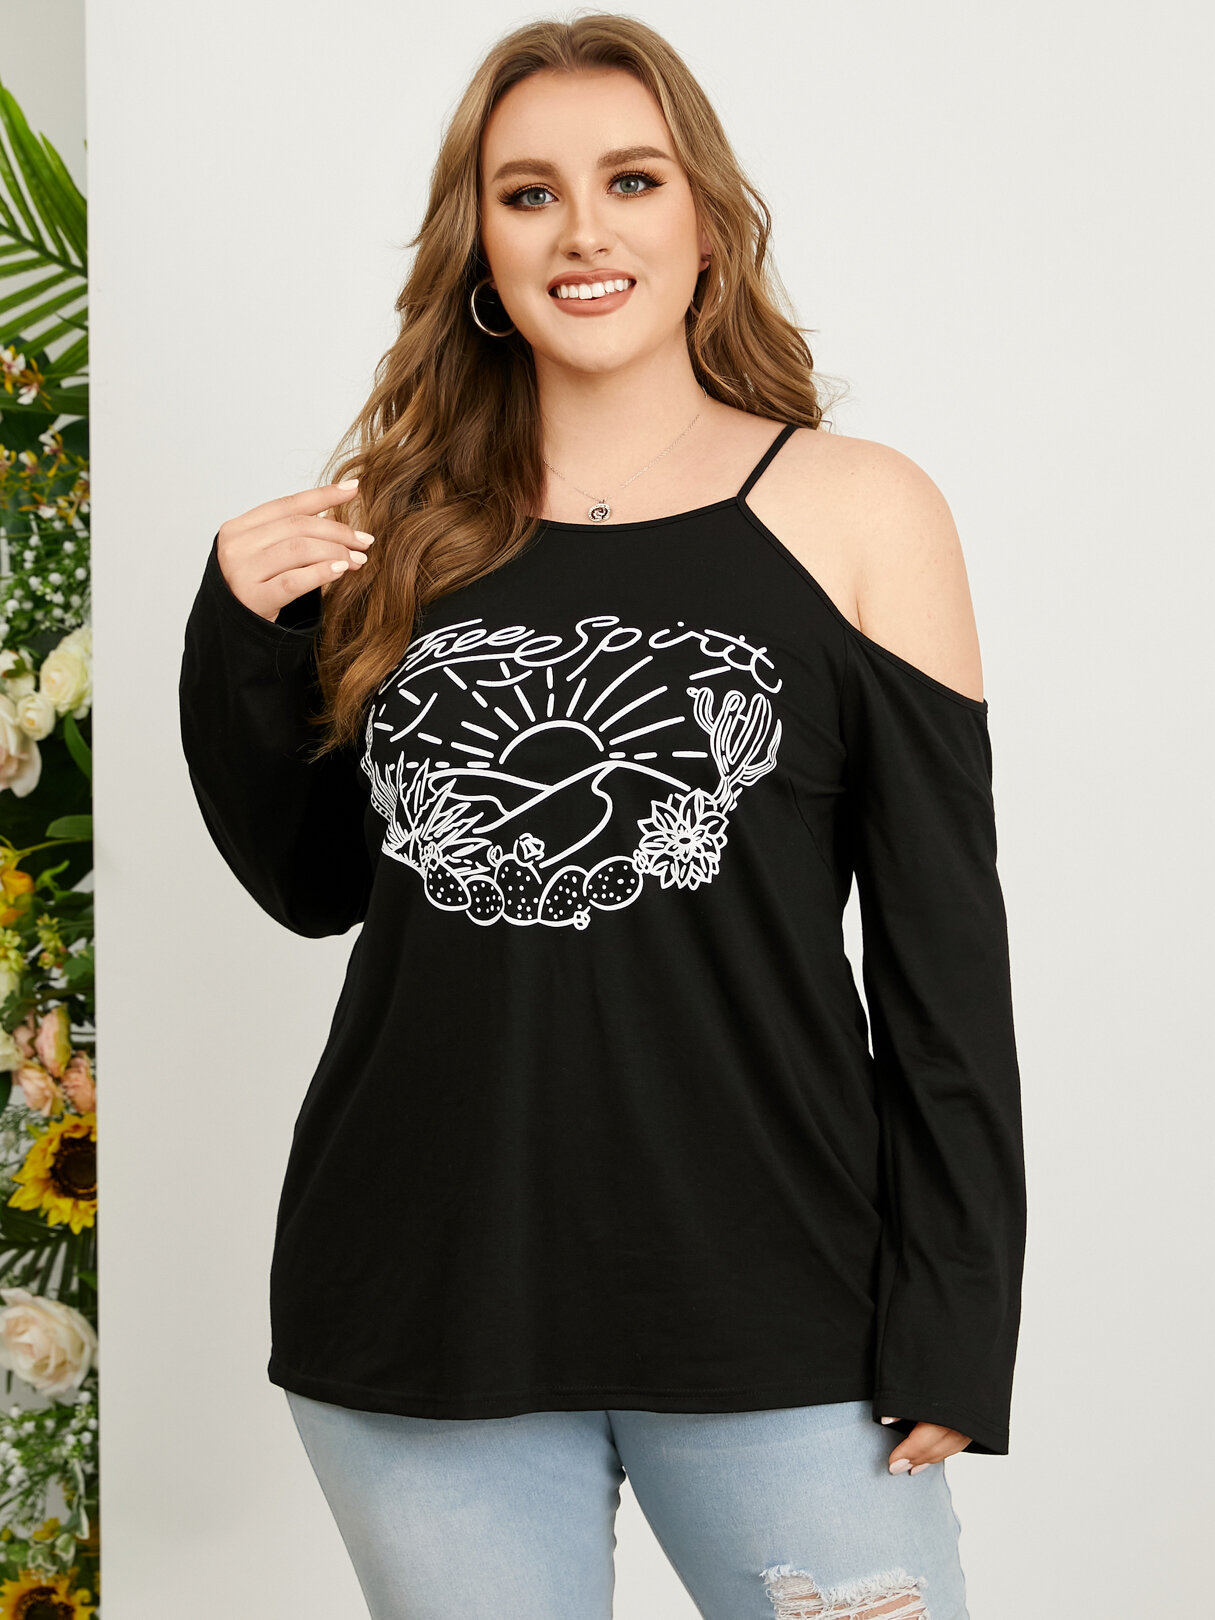 YOINS Plus Size Cold Shoulder Letter Graphic Spaghetti Strap Tee